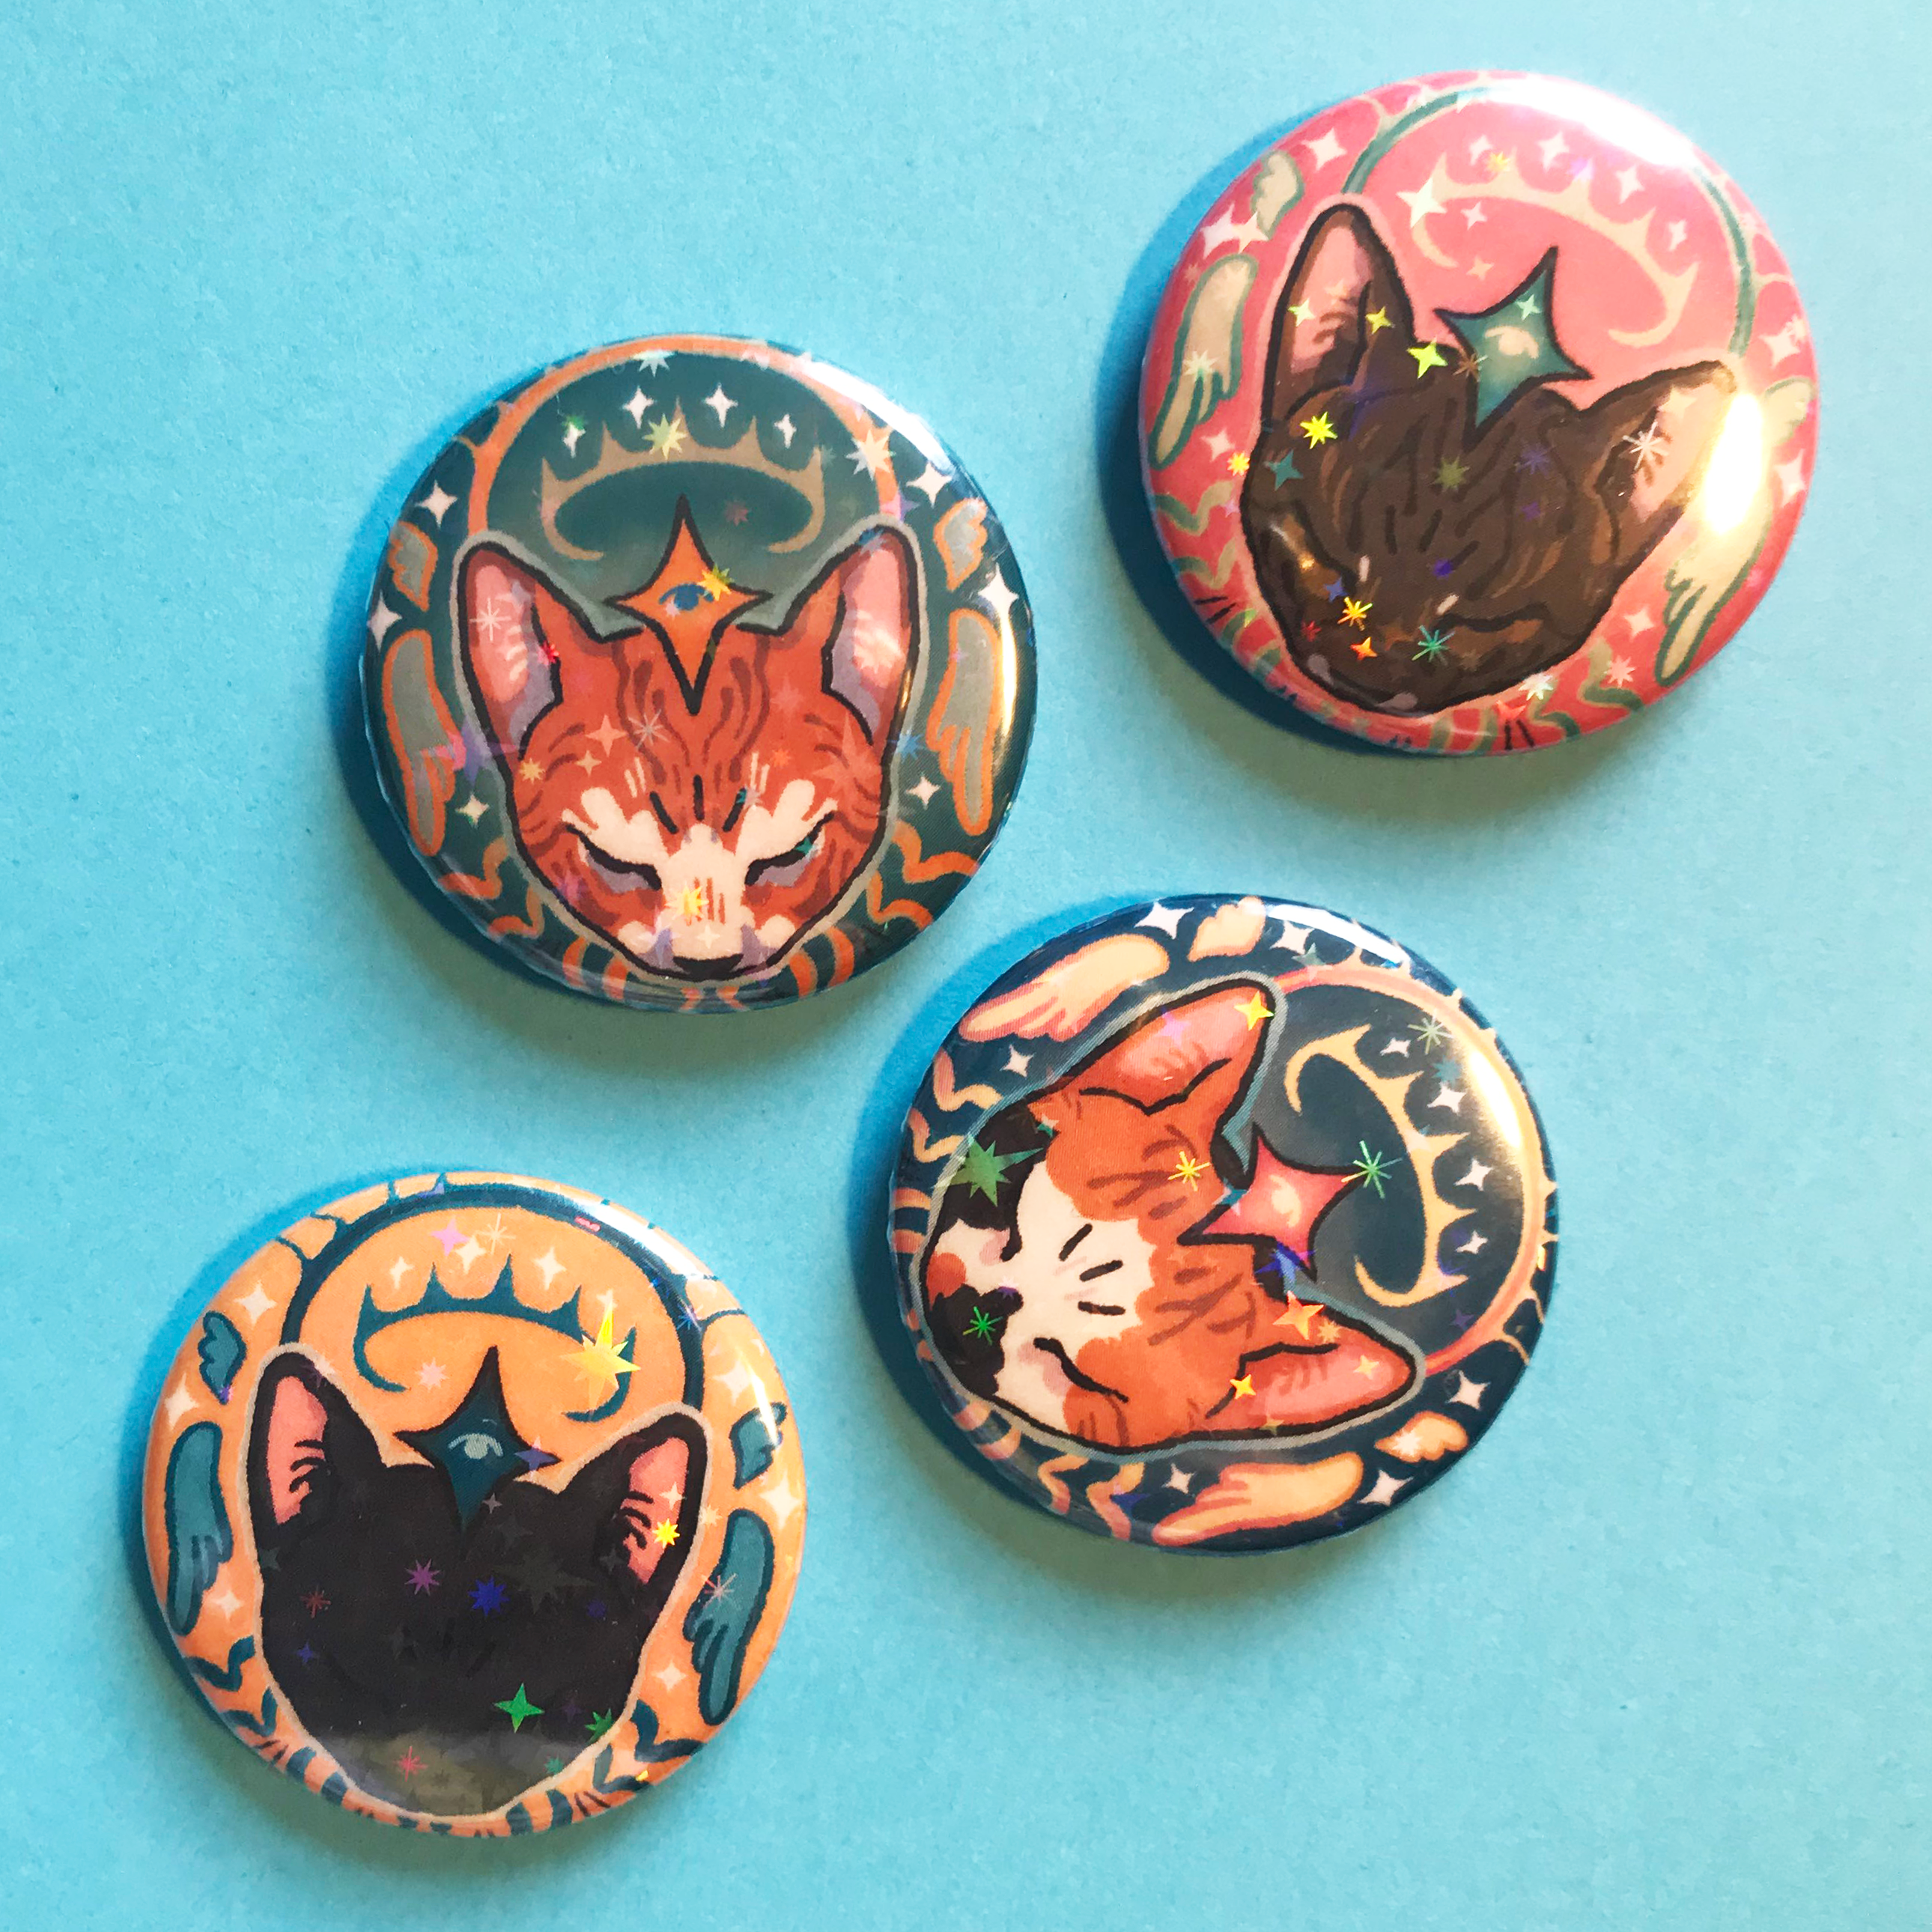 A photo of four badges on a blue background. The design on each is of an illustrated cats head surrounded by drawn halo and wing-esque motifs. Each badge has a different colour scheme and fur pattern of cat.